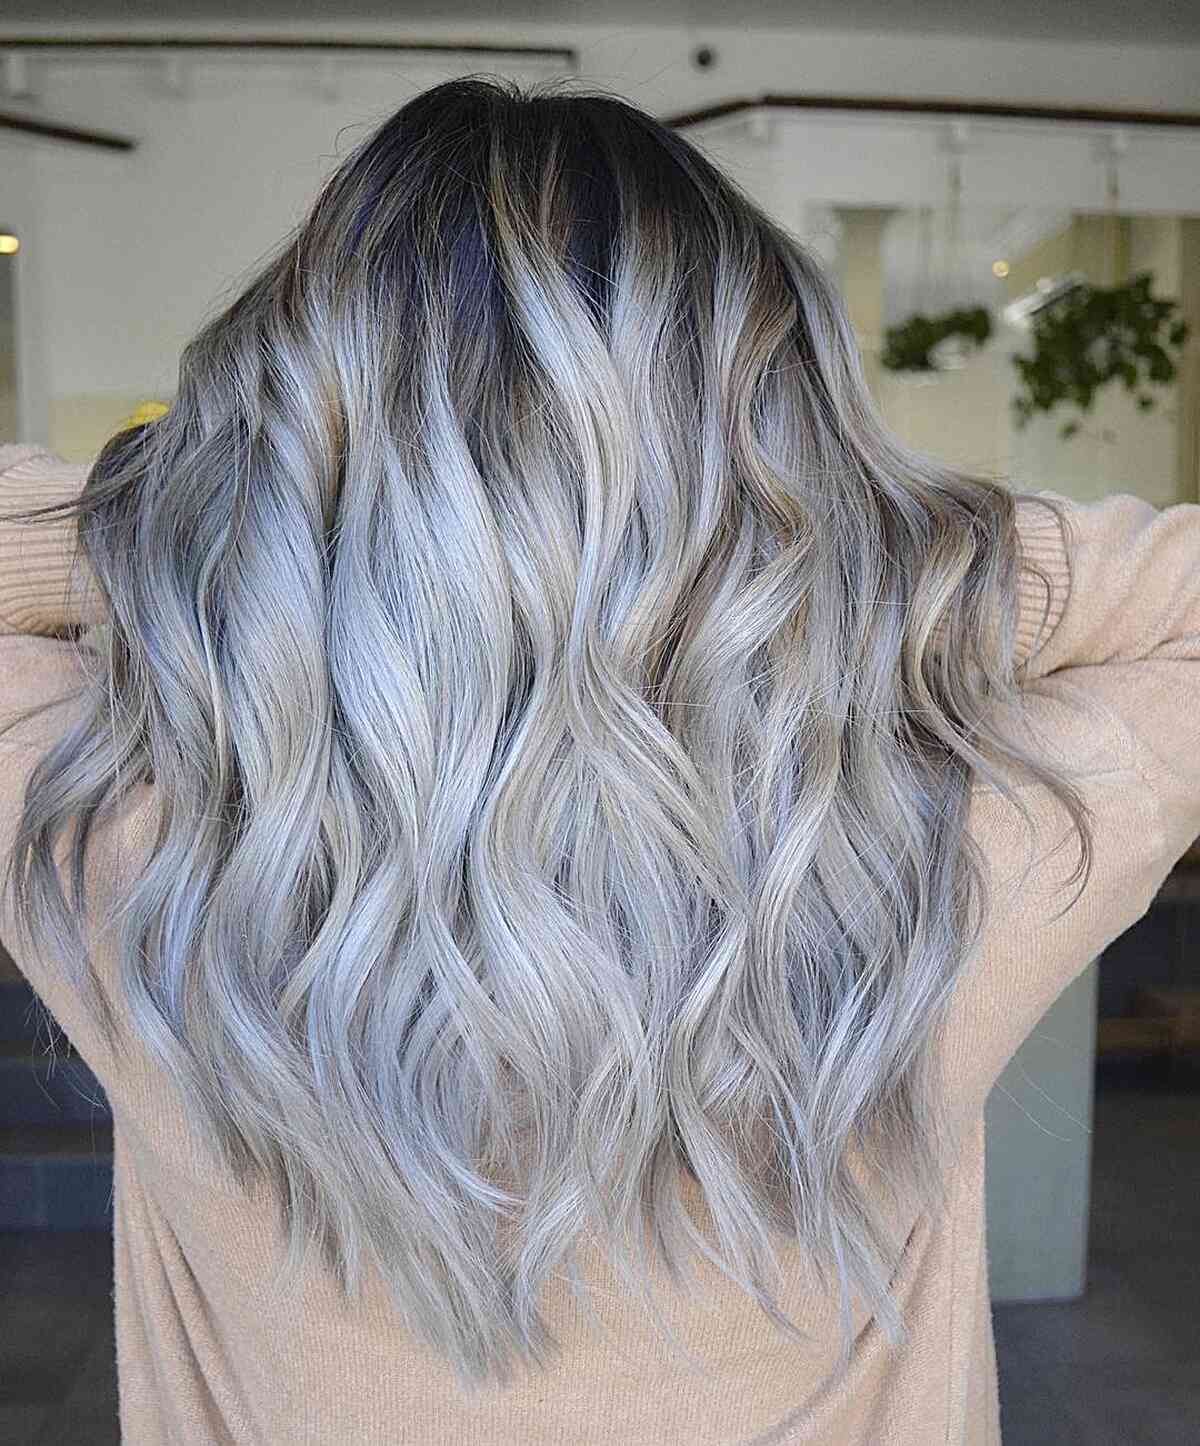 Medium-Long Hair with Light Smokey Grey Ice Blonde Balayage and Dark Base Color Styled with Thick Waves